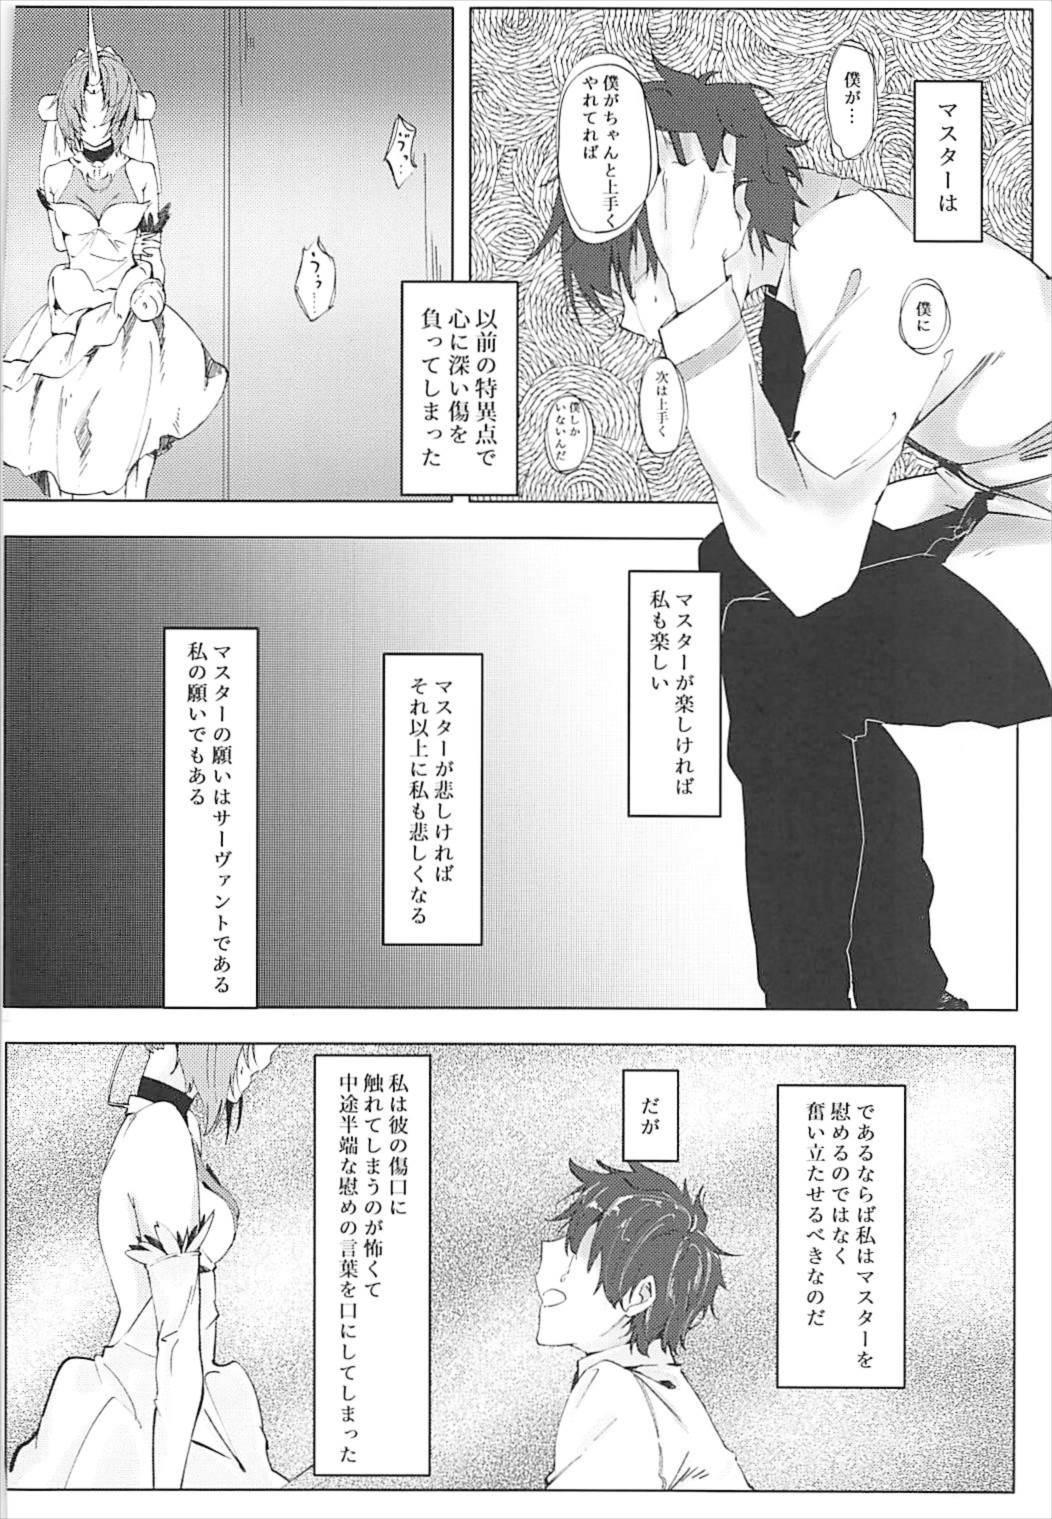 Dicksucking alones - Fate grand order Bedroom - Page 8